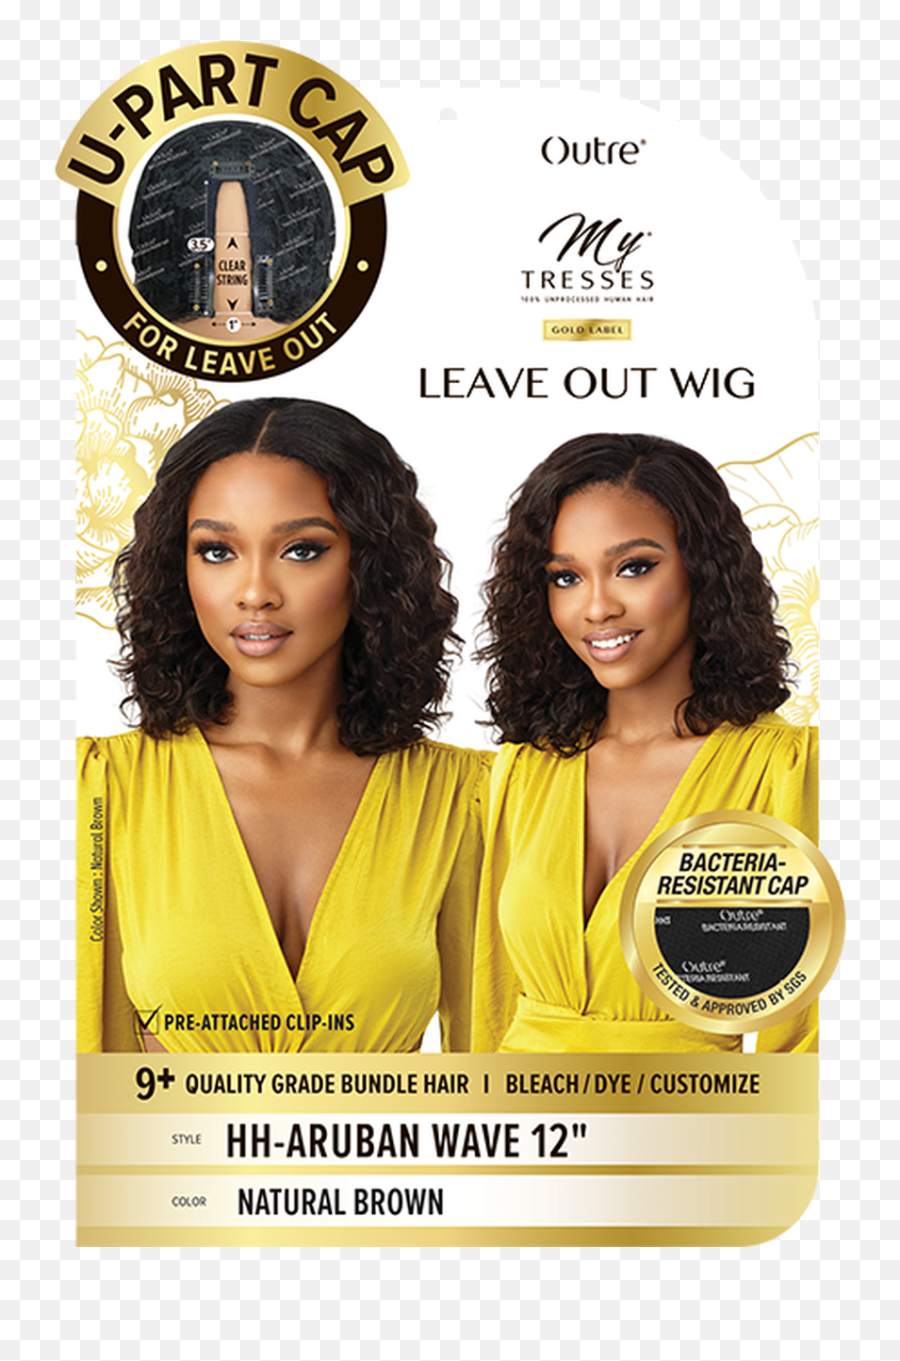 Outre Mytresses 100 Unprocessed Human Hair Gold Label Leave Out Wig - Aruban Wave 12 Emoji,Emotion Wig Video